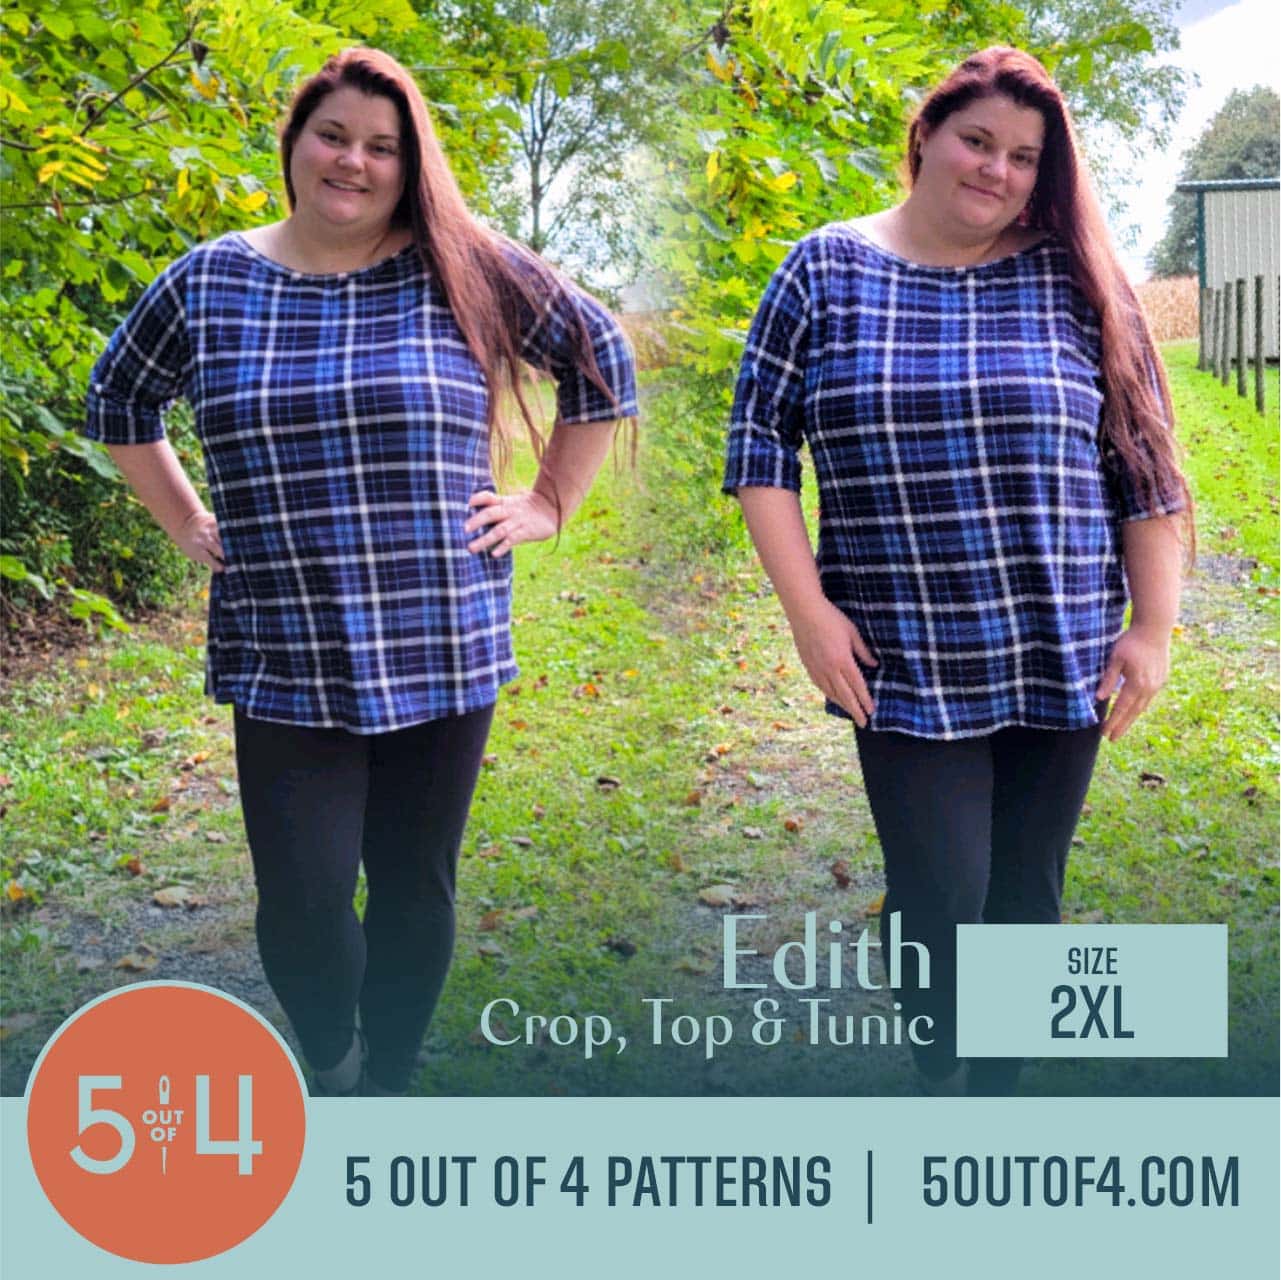 Edith Crop, Top, and Tunic - 5 out of 4 Patterns